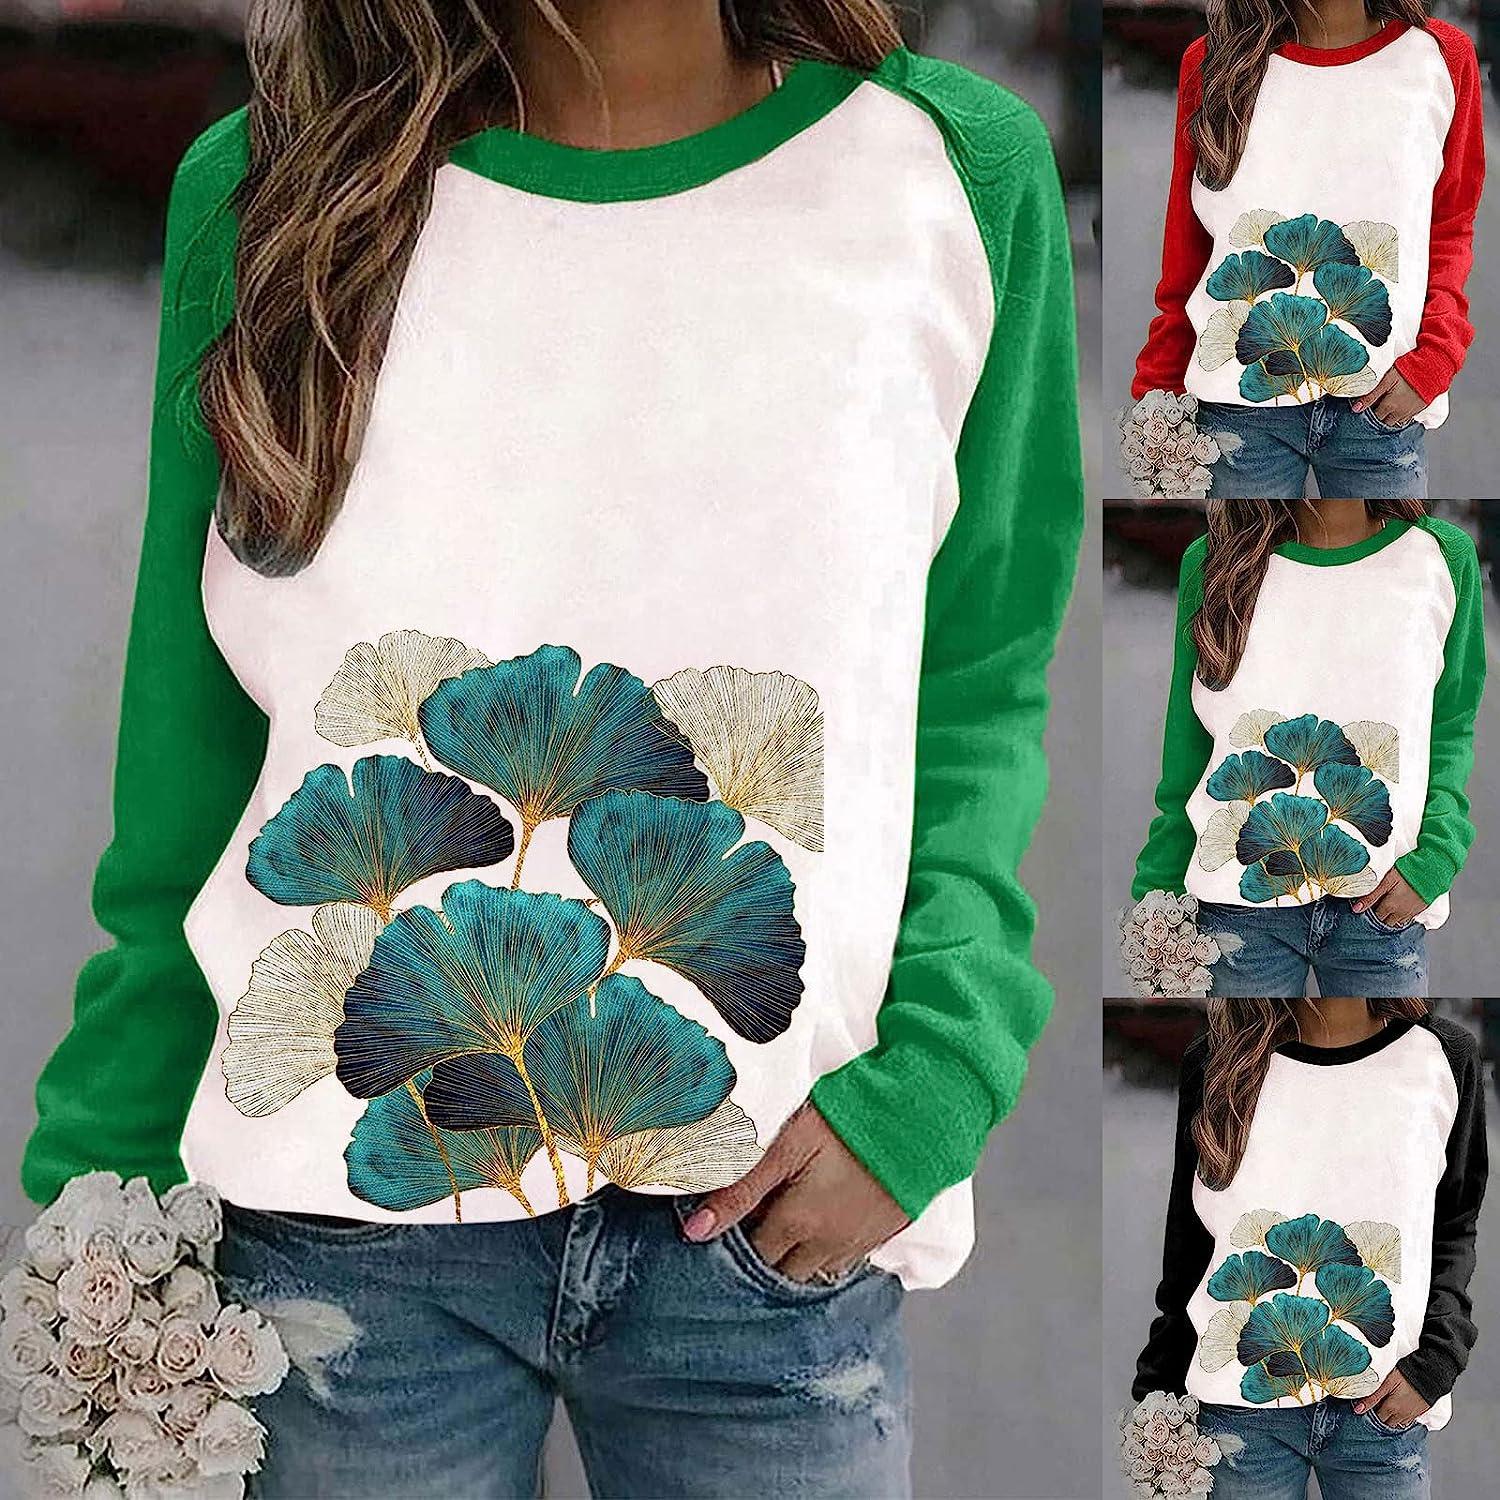 Sweatshirt for Women Casual Spring Fall Print Crewneck Pullover Tops  Splicing Long Sleeve Shirts Fit Tunic Tees Small Black